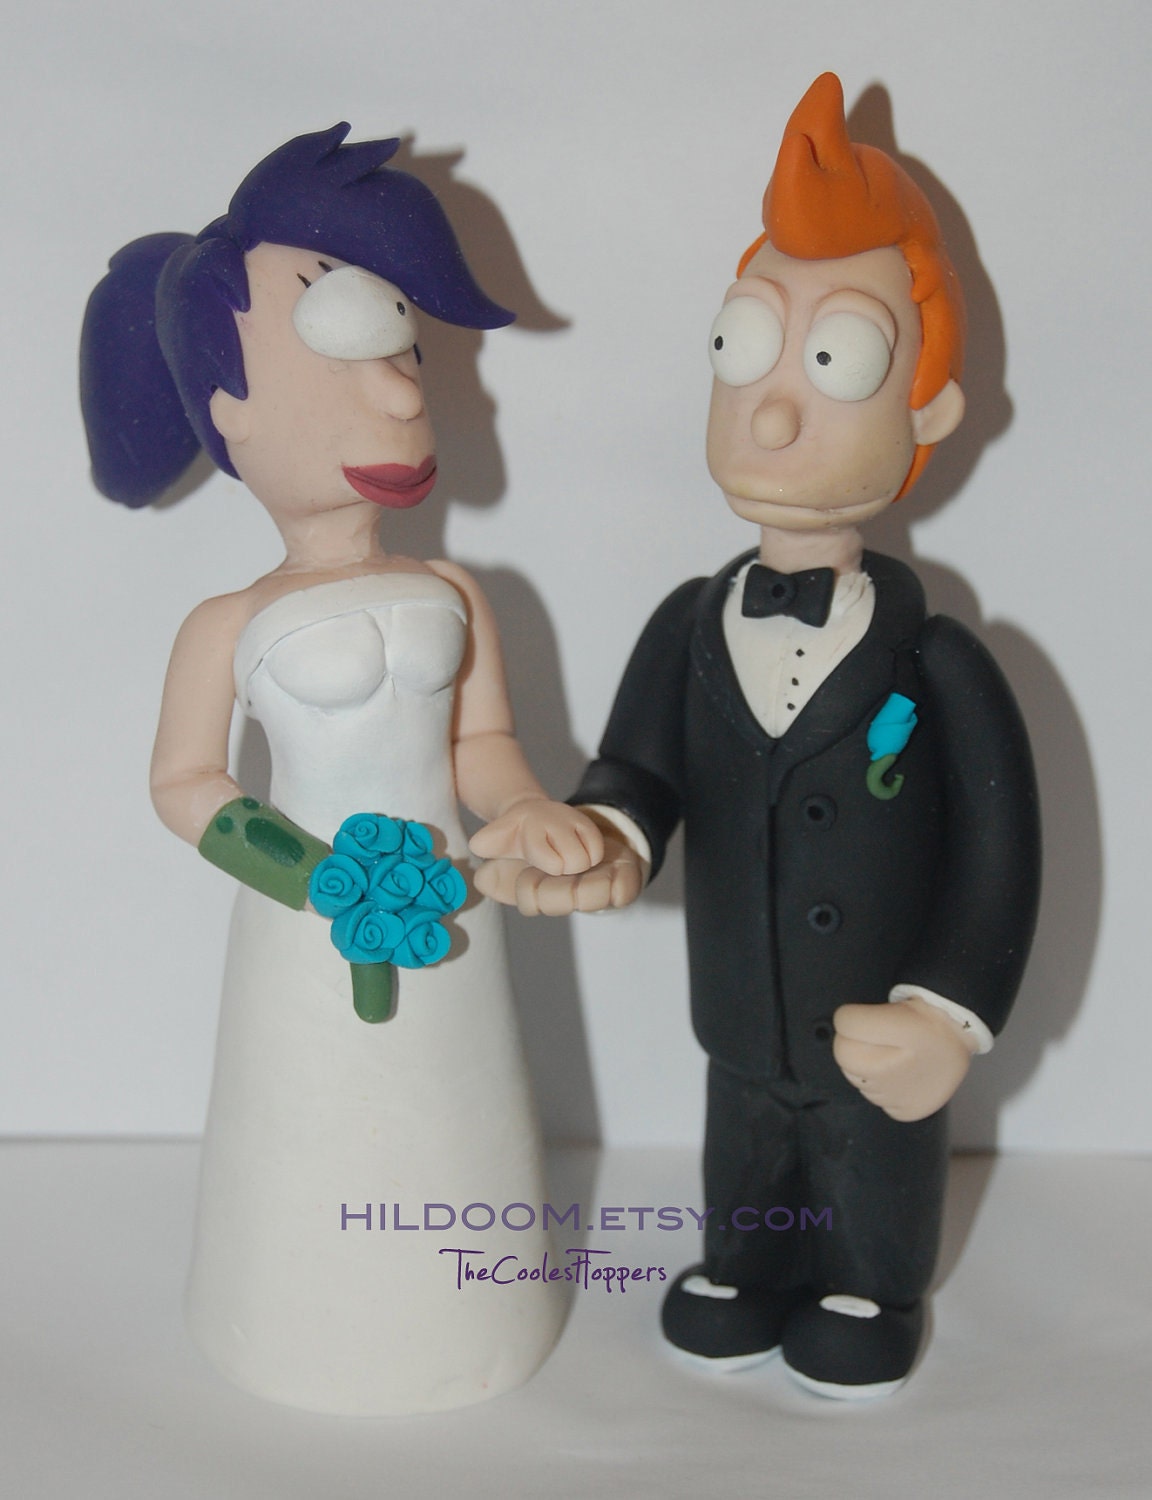 Mutant and Human Wedding Cake Topper